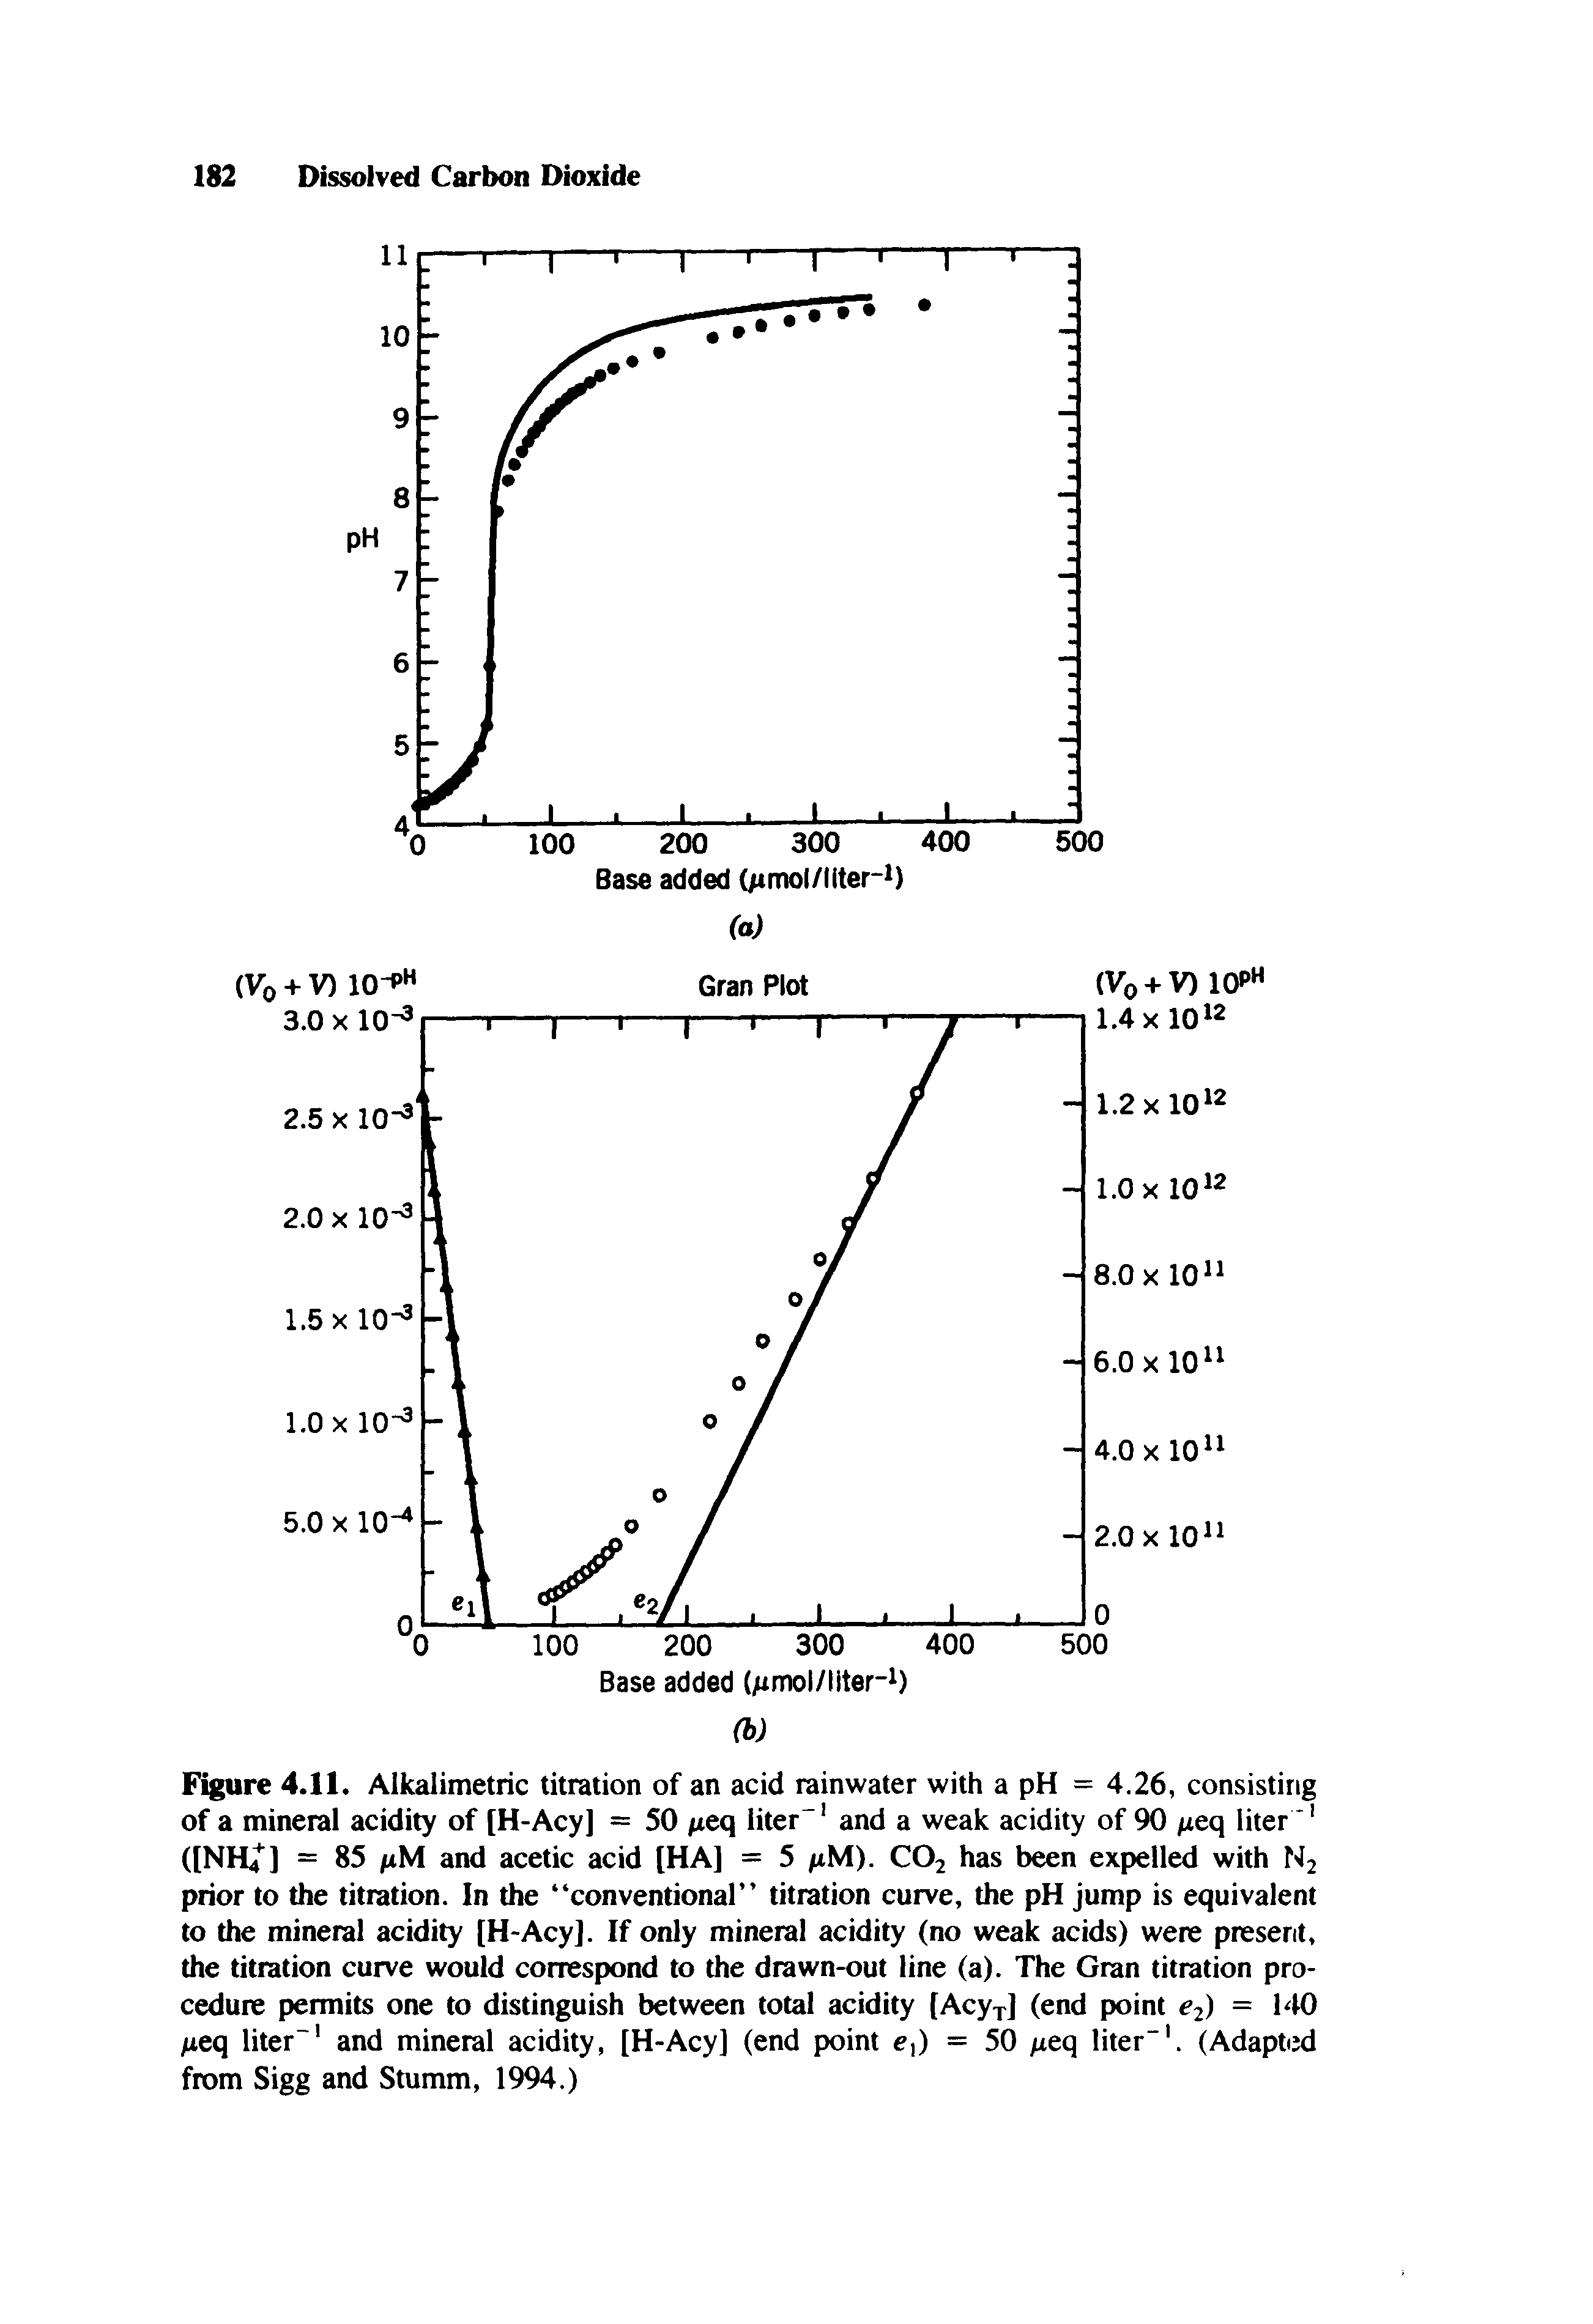 Figure 4.11. Alkalimetric titration of an acid rainwater with a pH = 4.26, consisting of a mineral acidity of [H-Acy] = 50 /xeq iiter and a weak acidity of 90 /xeq liter ([NH/] = 85 /iM and acetic acid [HA] = 5 fiM). COj has been expelled with N2 prior to the titration. In the conventional titration curve, the pH jump is equivalent to the mineral acidity [H-Acy]. If only mineral acidity (no weak acids) were present, the titration curve would correspond to the drawn-out line (a). The Gran titration procedure permits one to distinguish between total acidity [Acyj] (end point 2) = 140 /ieq liter" and mineral acidity, [H-Acy] (end point e ) = 50 ieq liter". (Adapted from Sigg and Stumm, 1994.)...